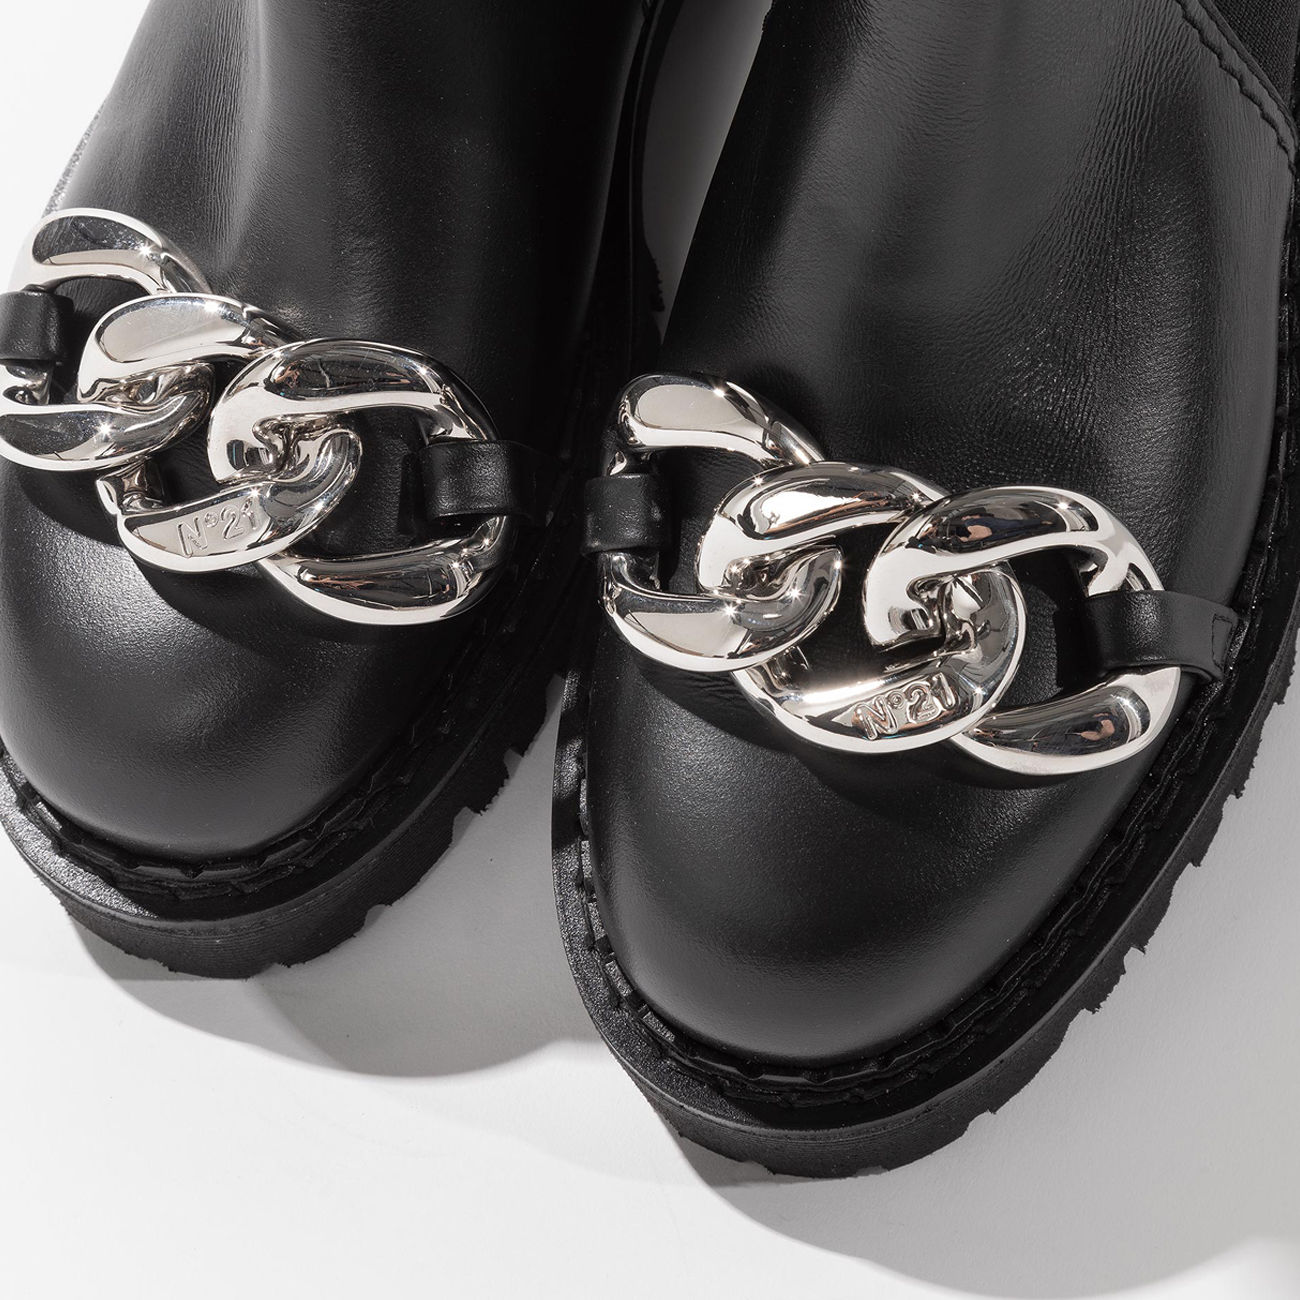 N°21 COMBAT BOOTS WITH CHAIN Woman Black | Mascheroni Store